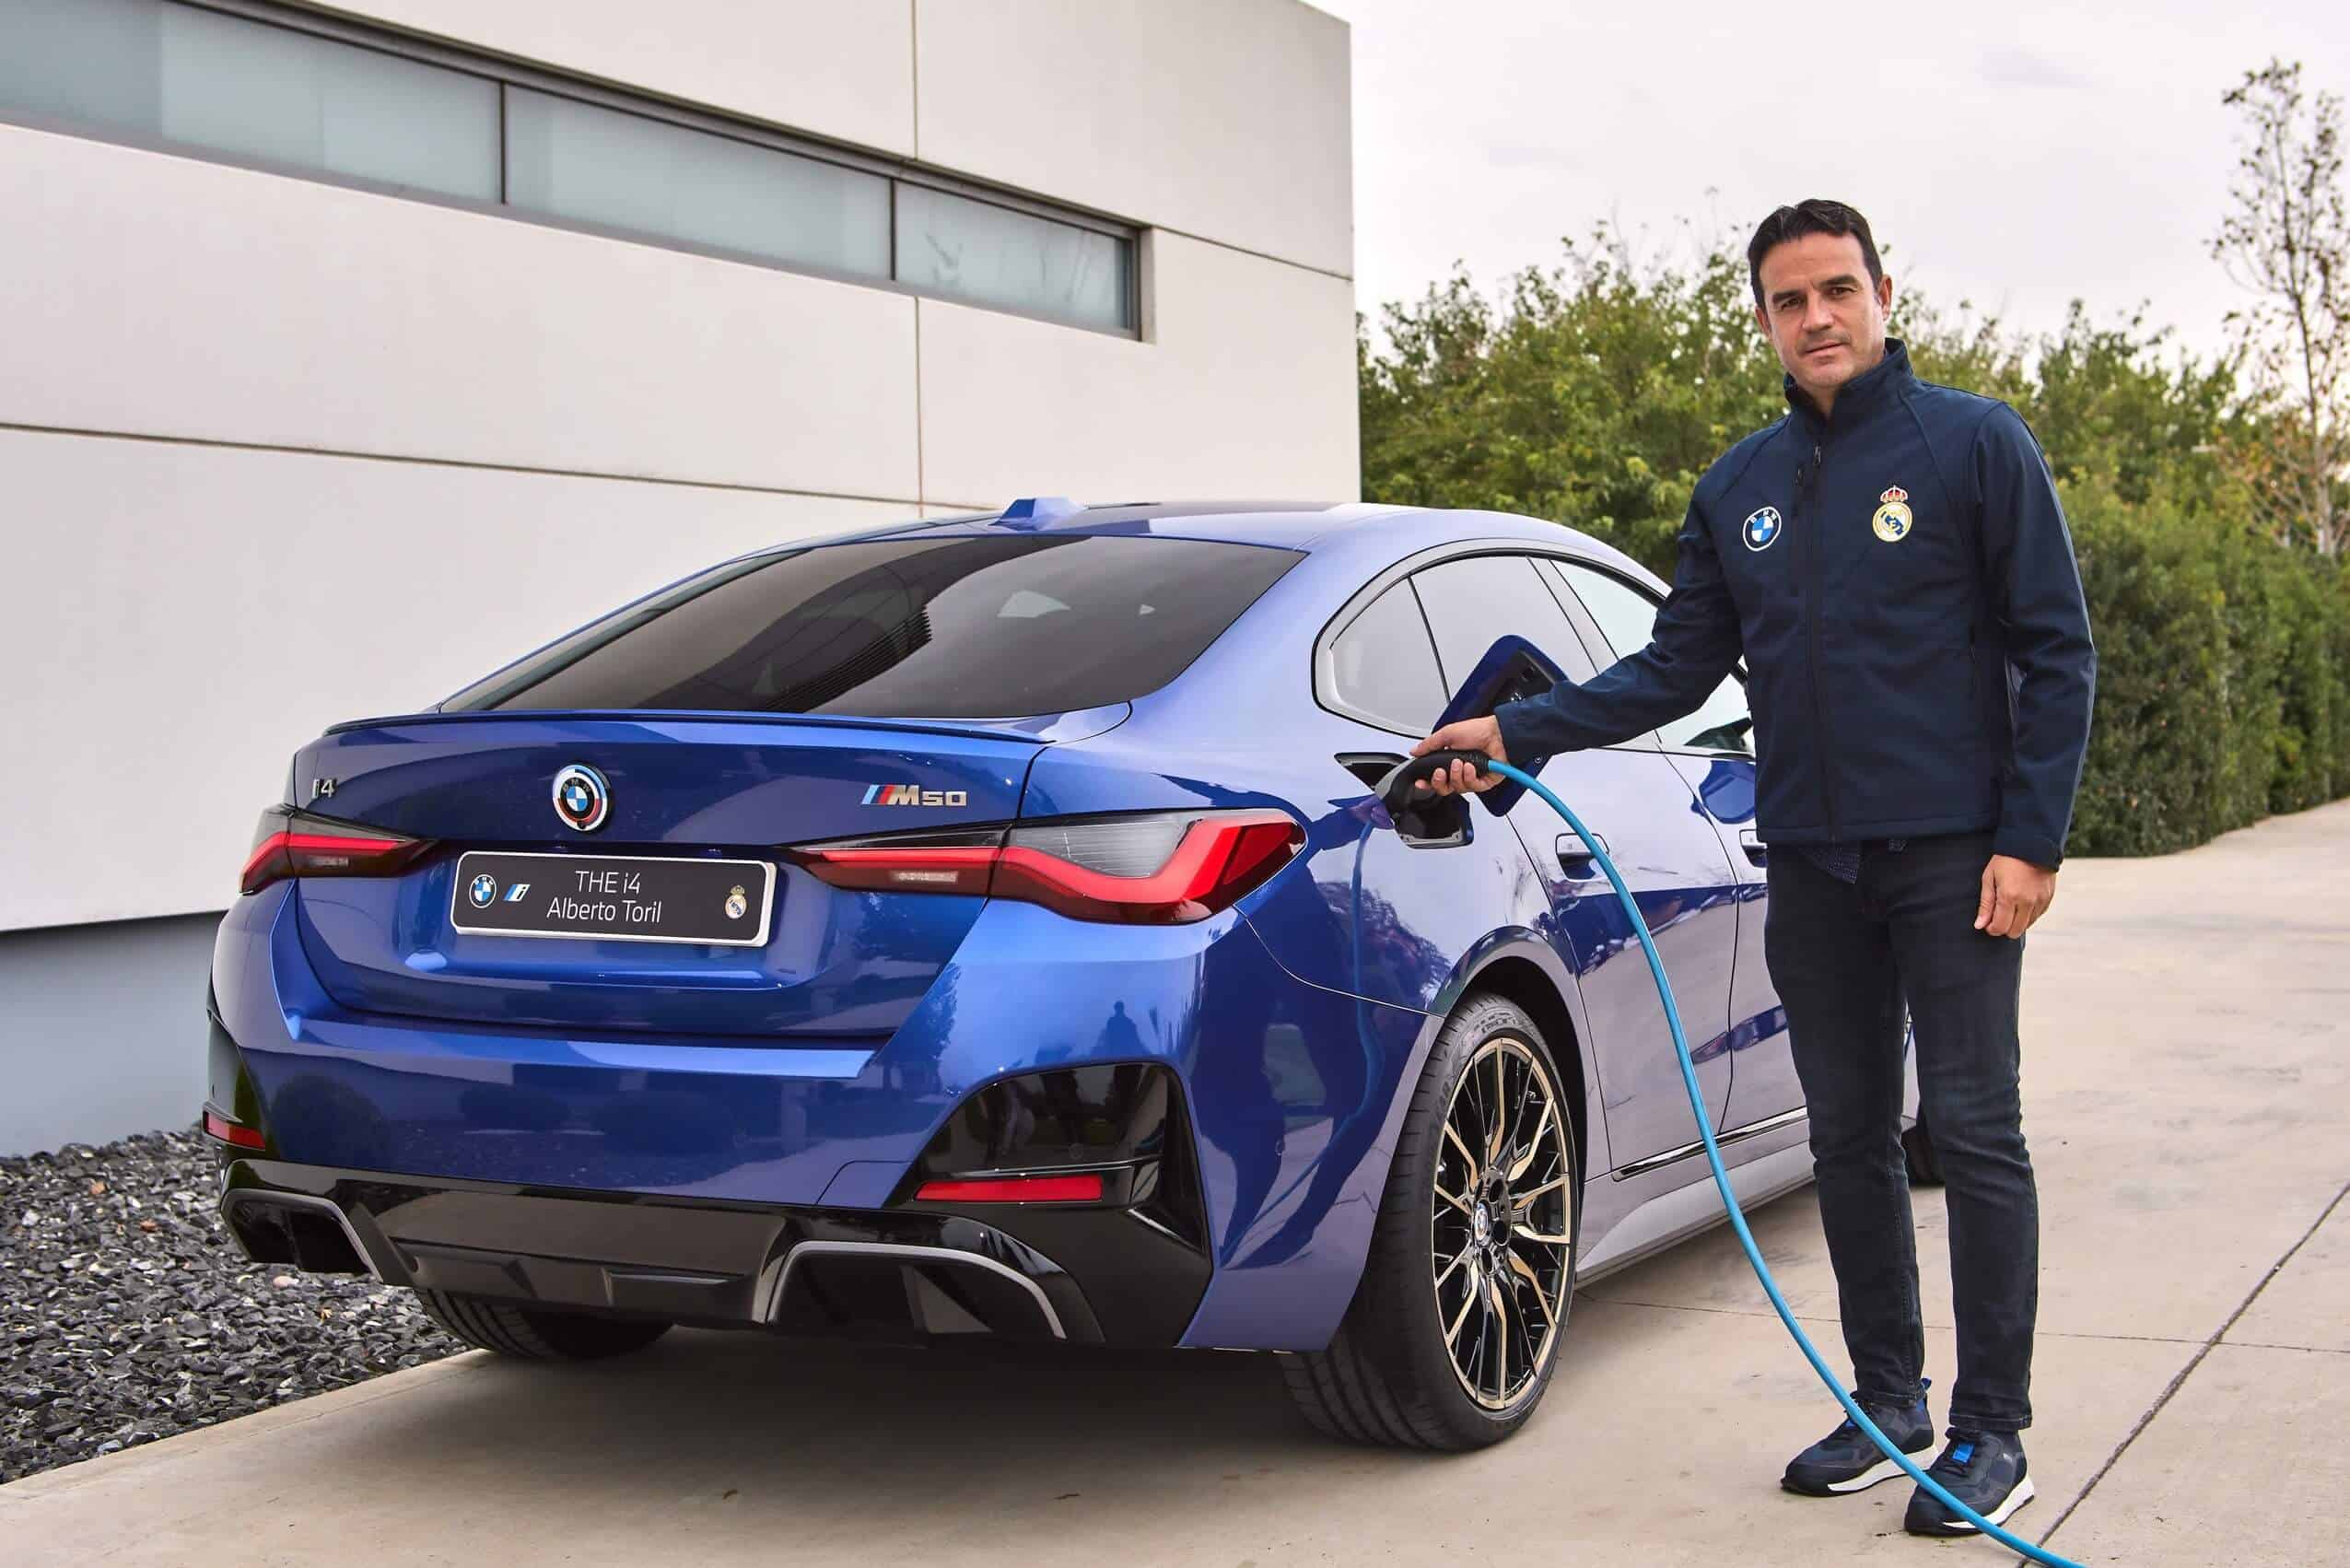 Real Madrid players get their BMWs 1